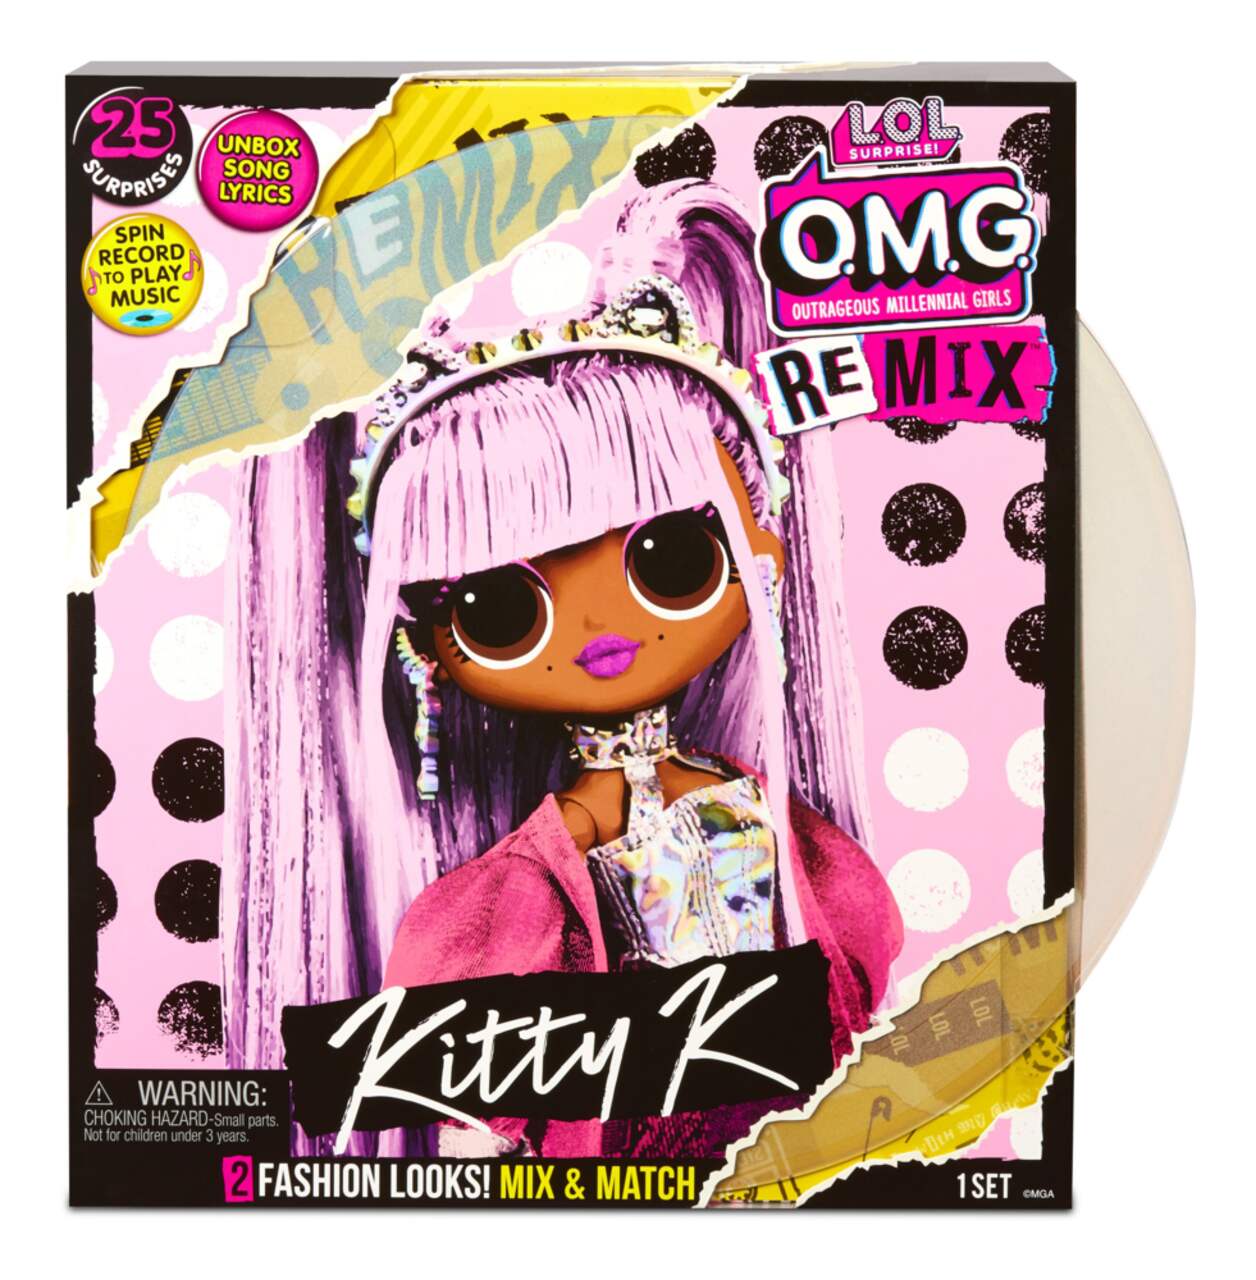 L.O.L. Surprise! O.M.G Remix Fashion Dolls Playset with Music For